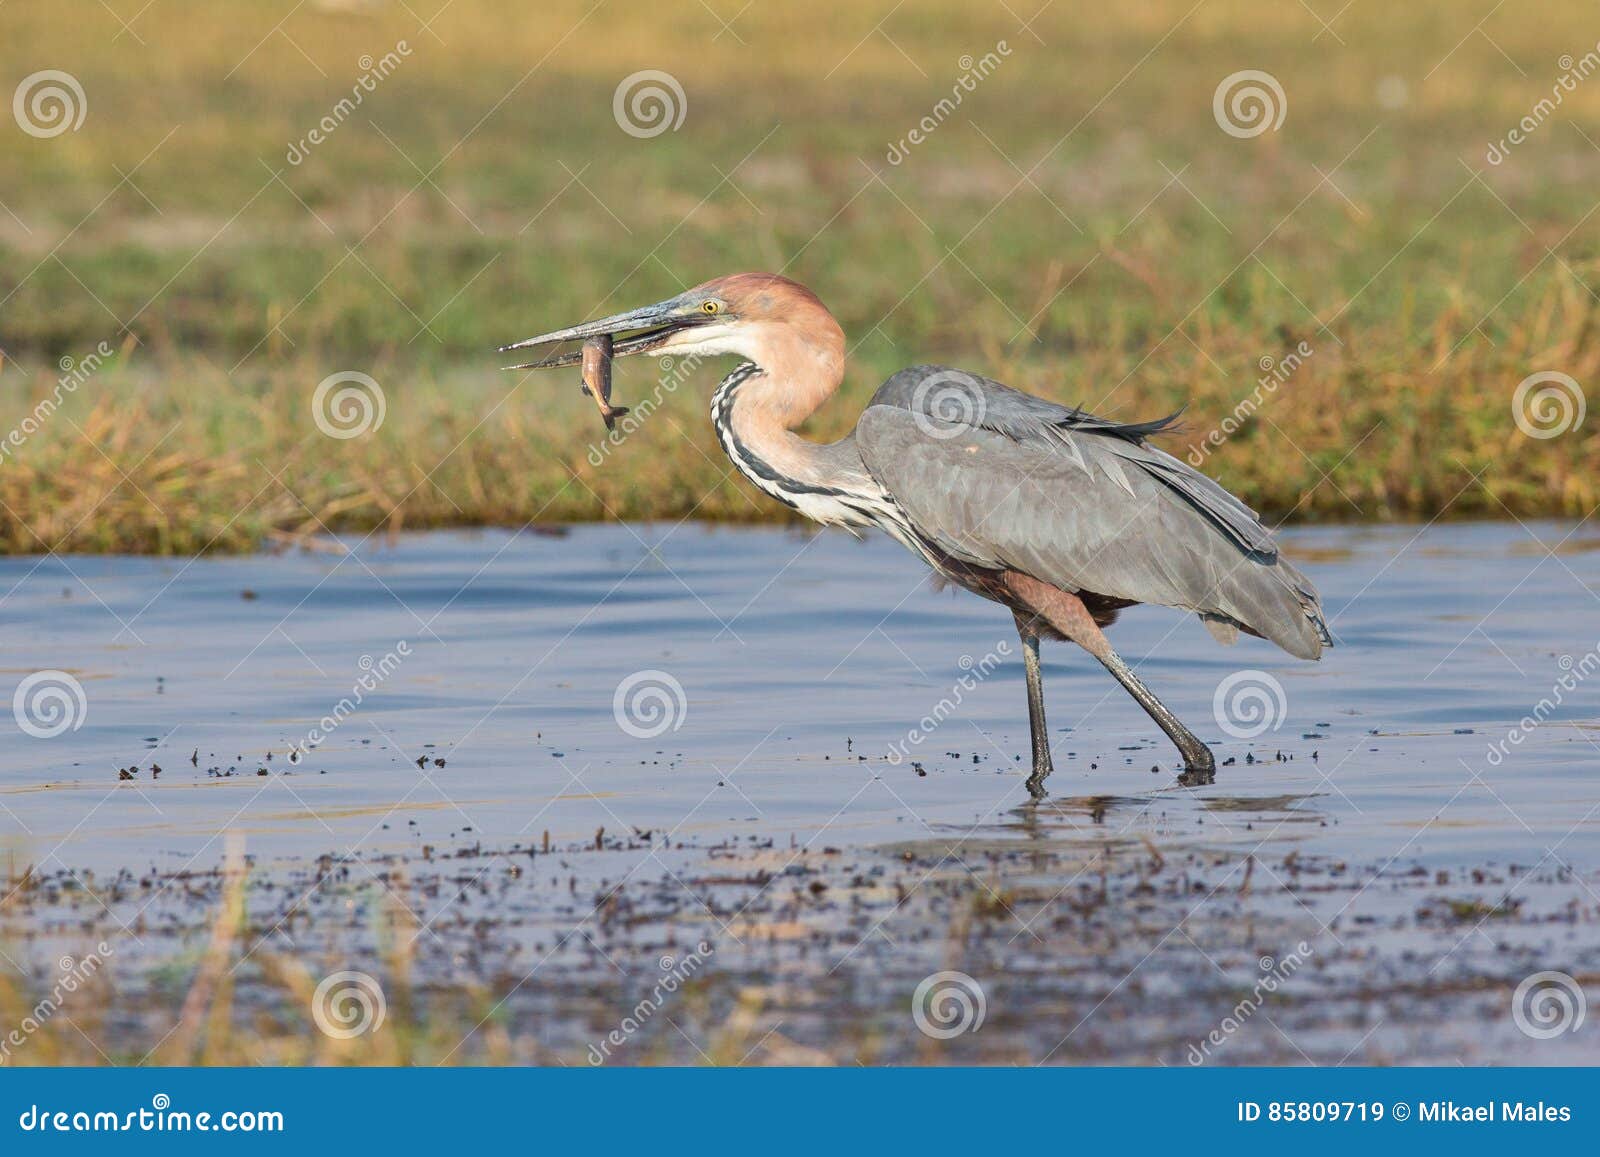 Goliath Heron with Fish in His Mouth Stock Image - Image of wildlife ...